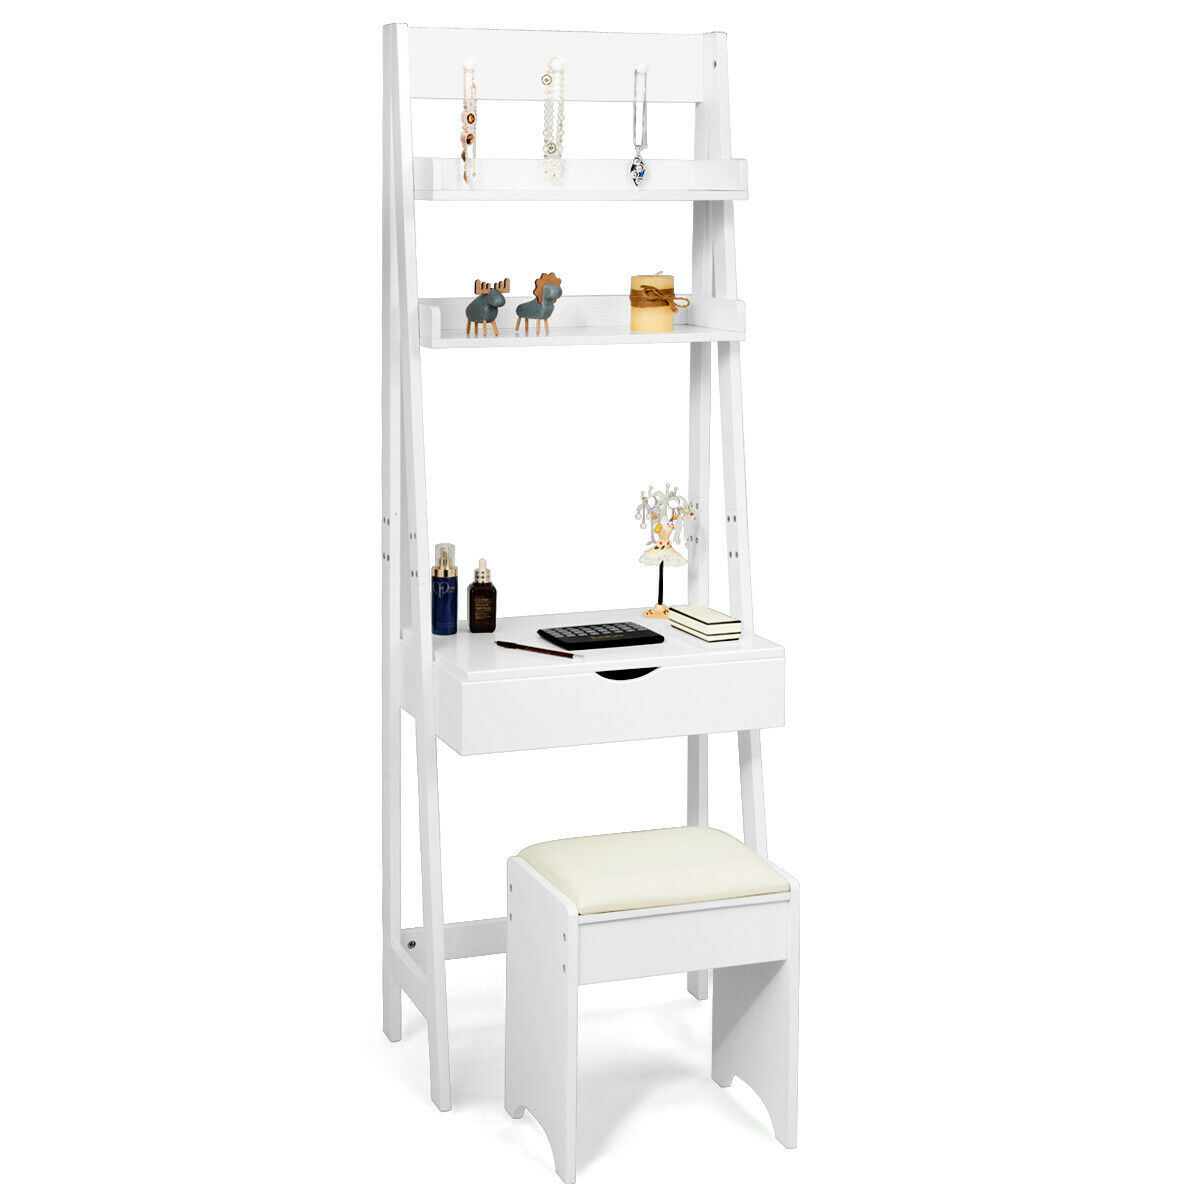 Ladder Styled Dressing Table with Shelves